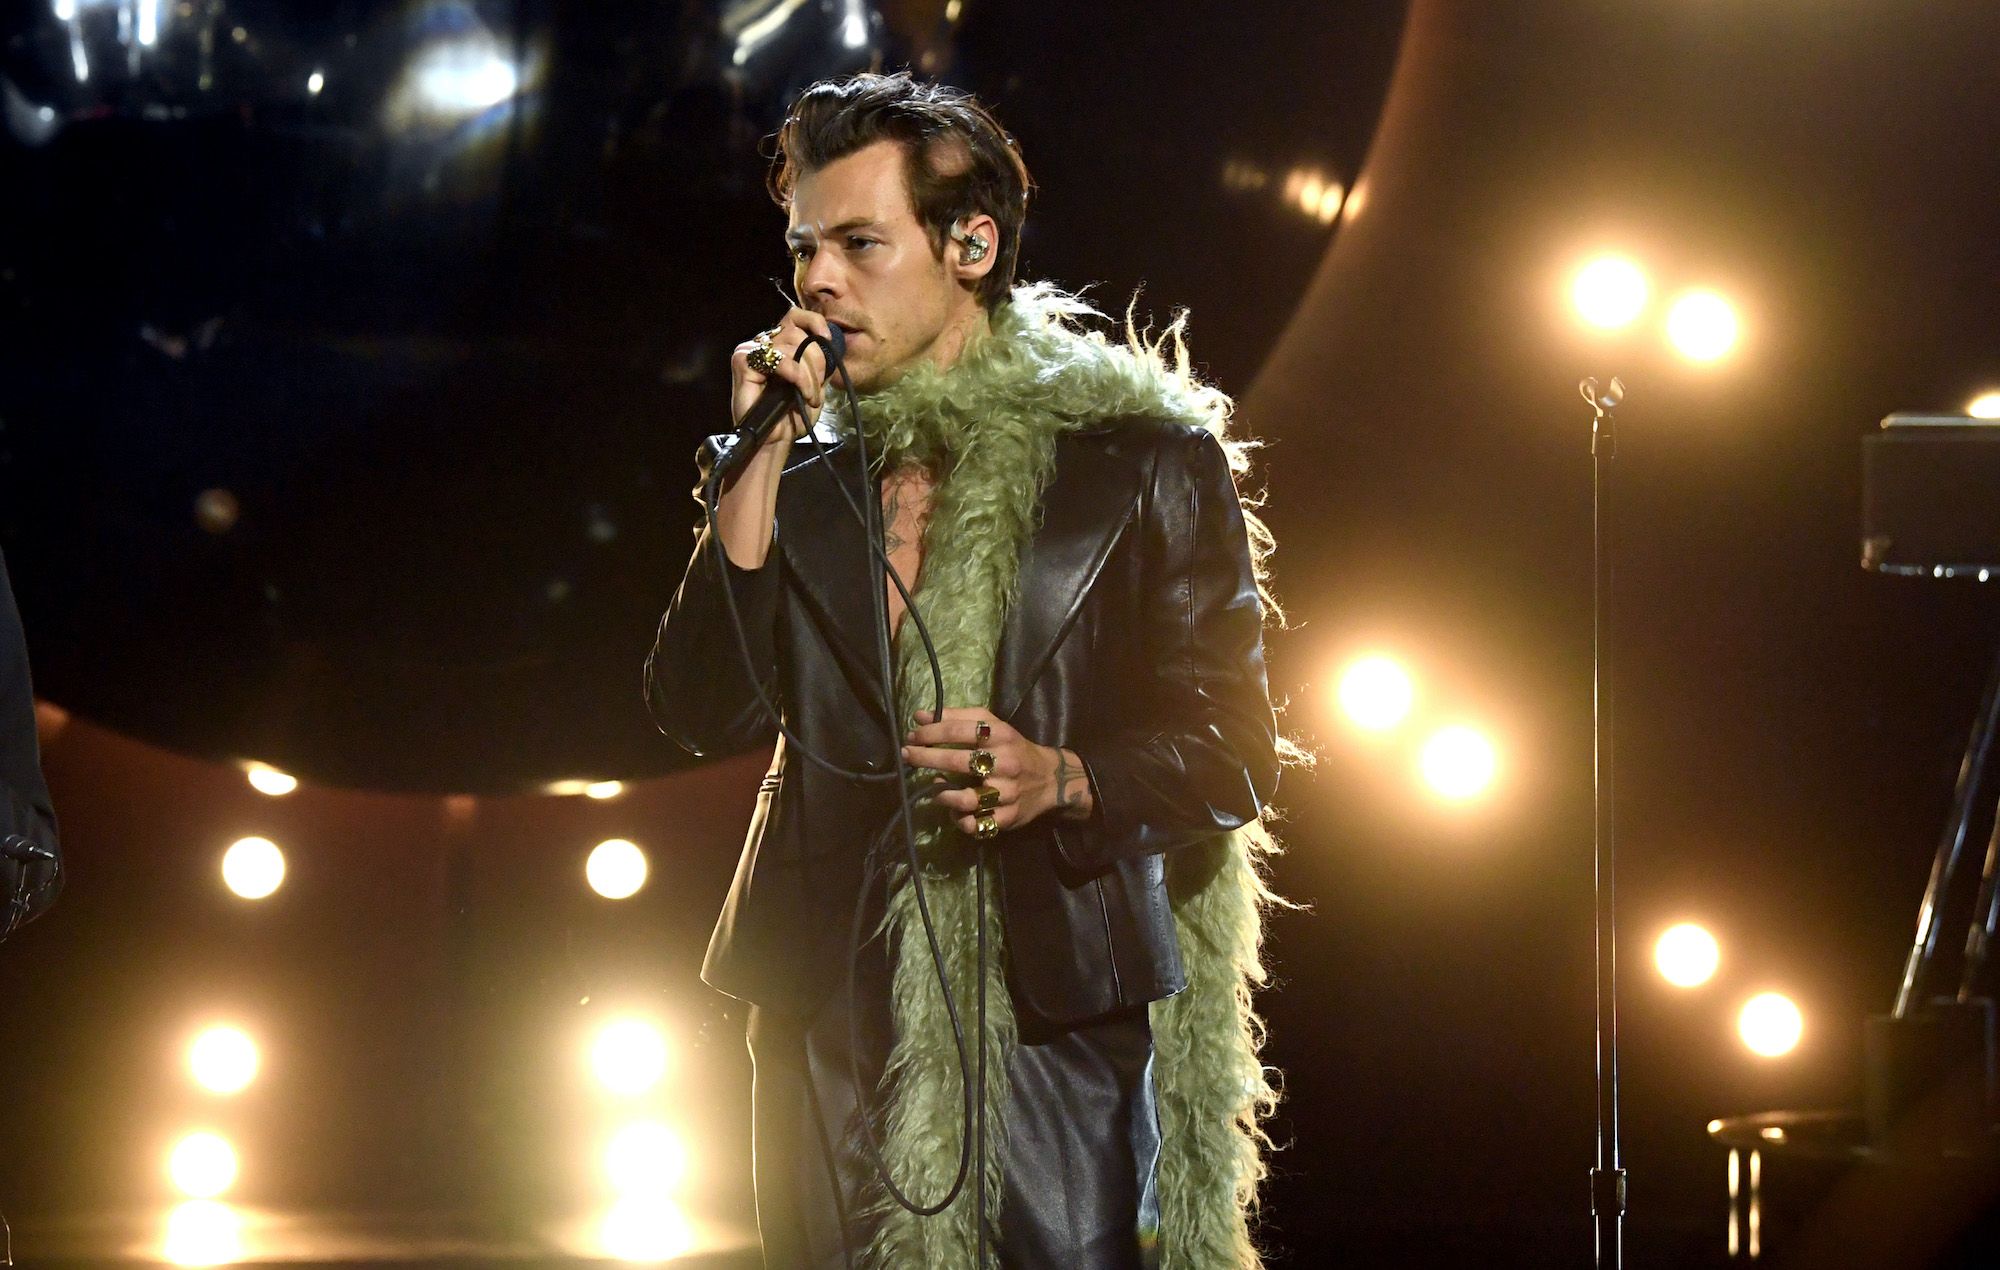 Watch Harry Styles open the Grammys 2021 main ceremony